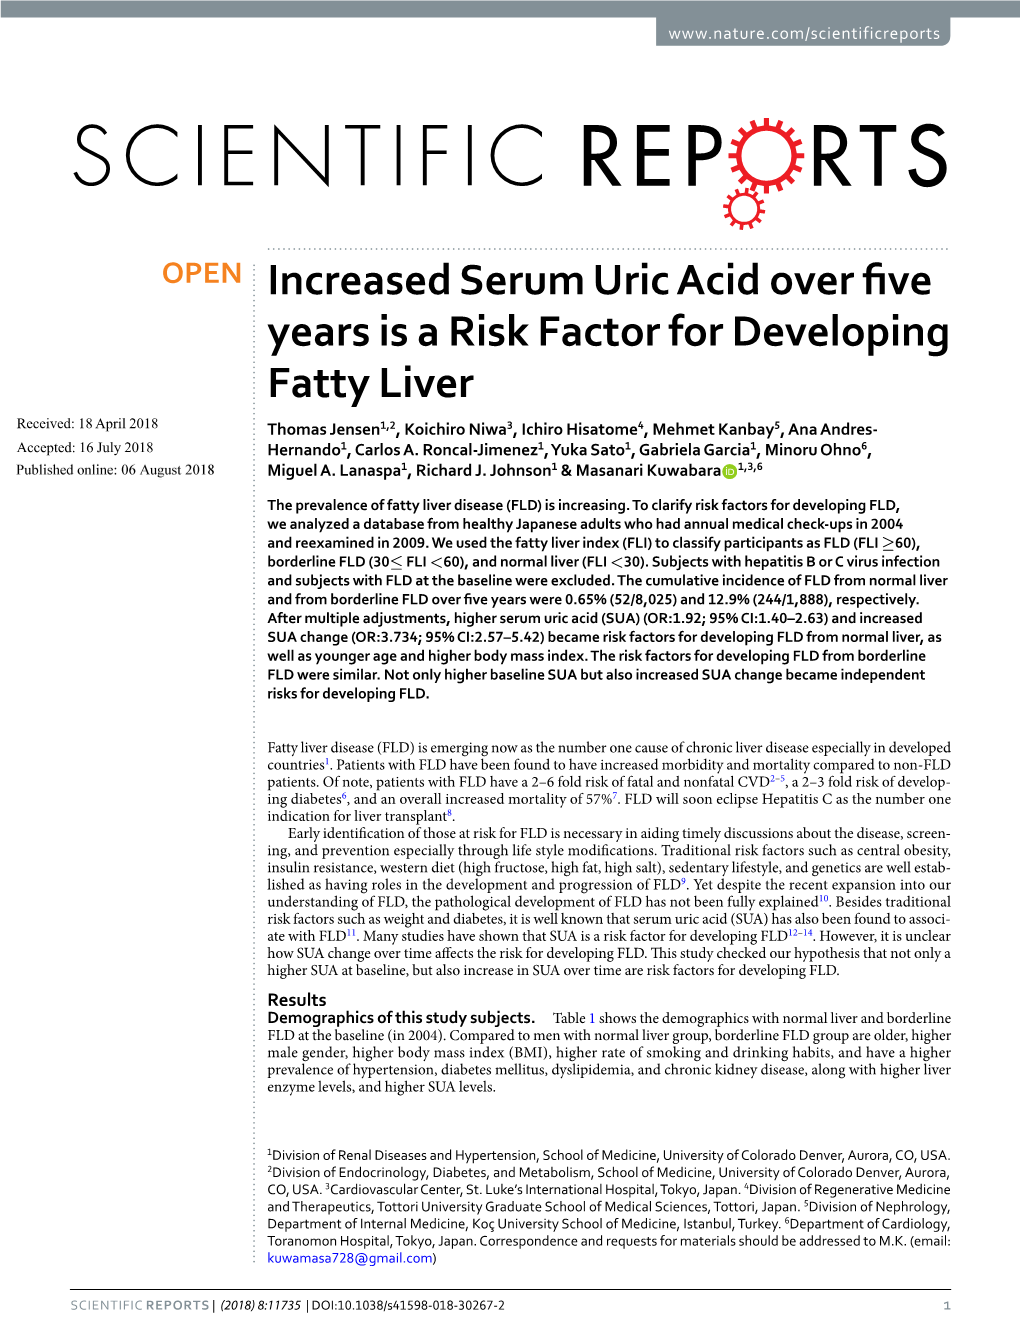 Increased Serum Uric Acid Over Five Years Is a Risk Factor For